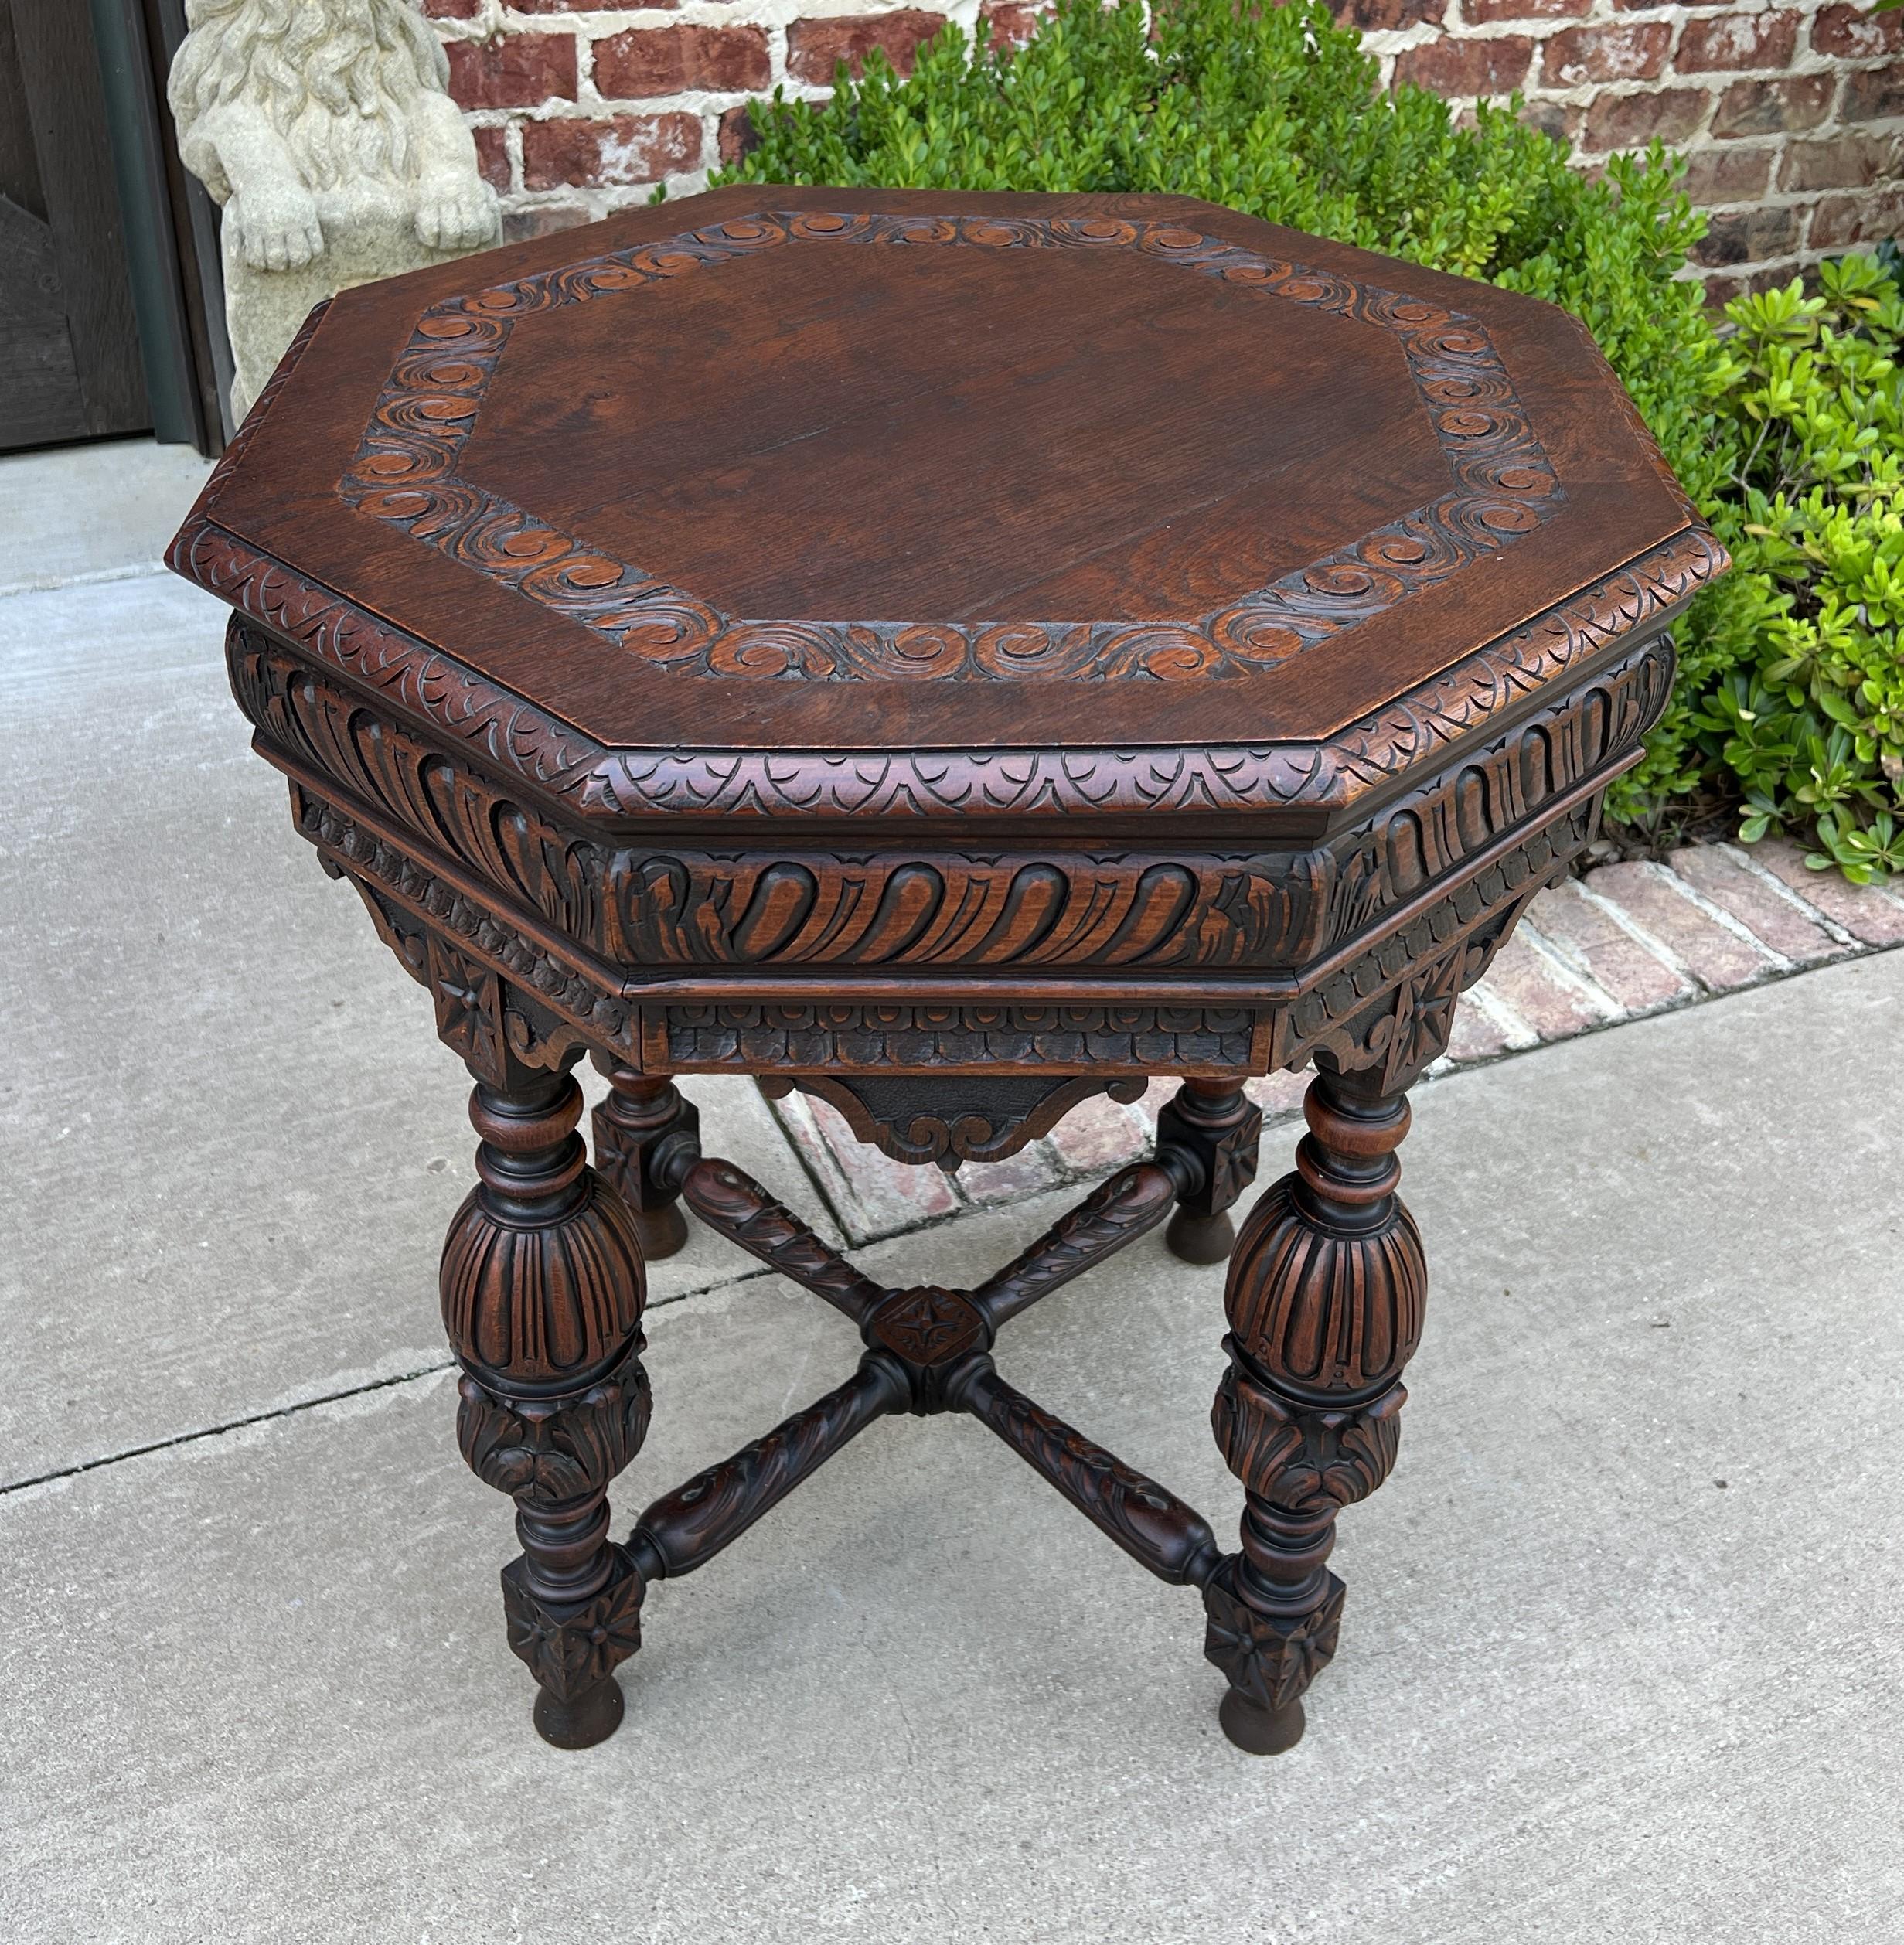 Antique French Table Octagonal Renaissance Revival Carved Oak, 19th Century In Good Condition For Sale In Tyler, TX